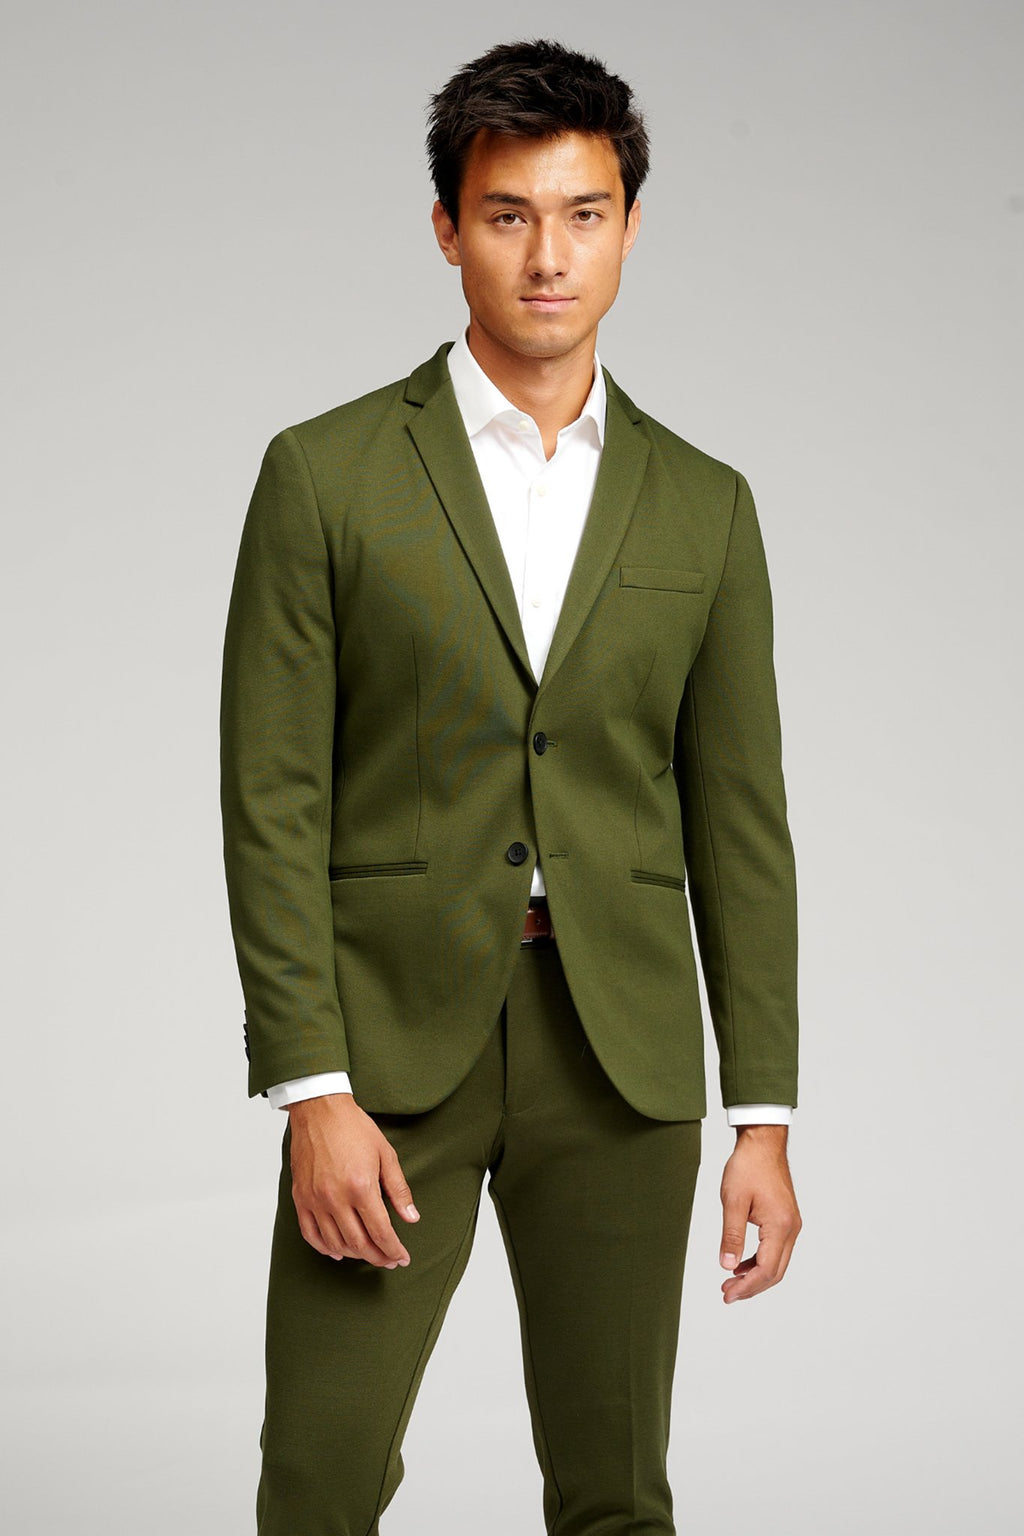 Performance Suit™️ (Verde oscuro) + Performance Camisa - Paquete